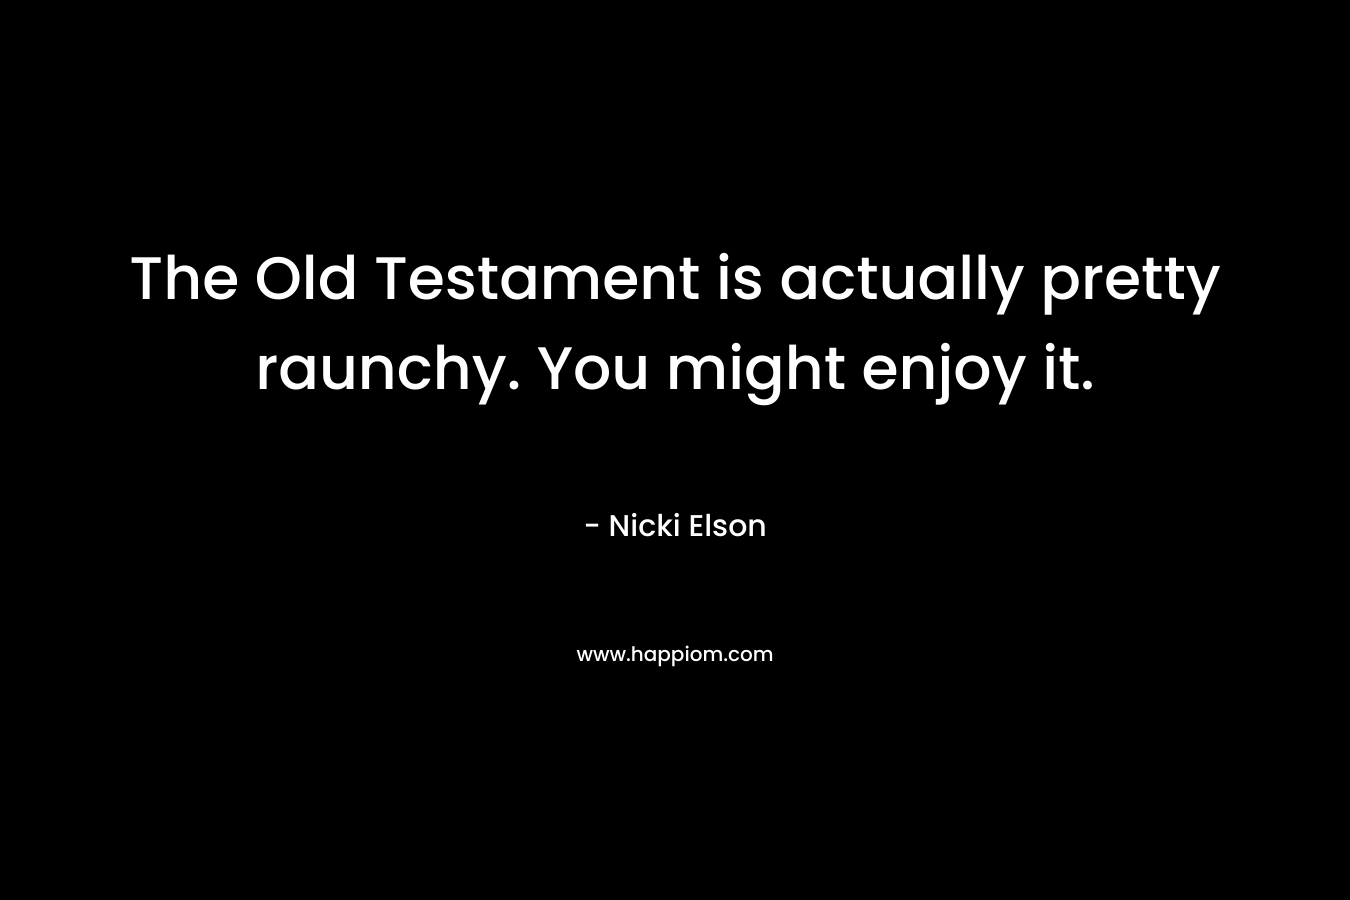 The Old Testament is actually pretty raunchy. You might enjoy it.